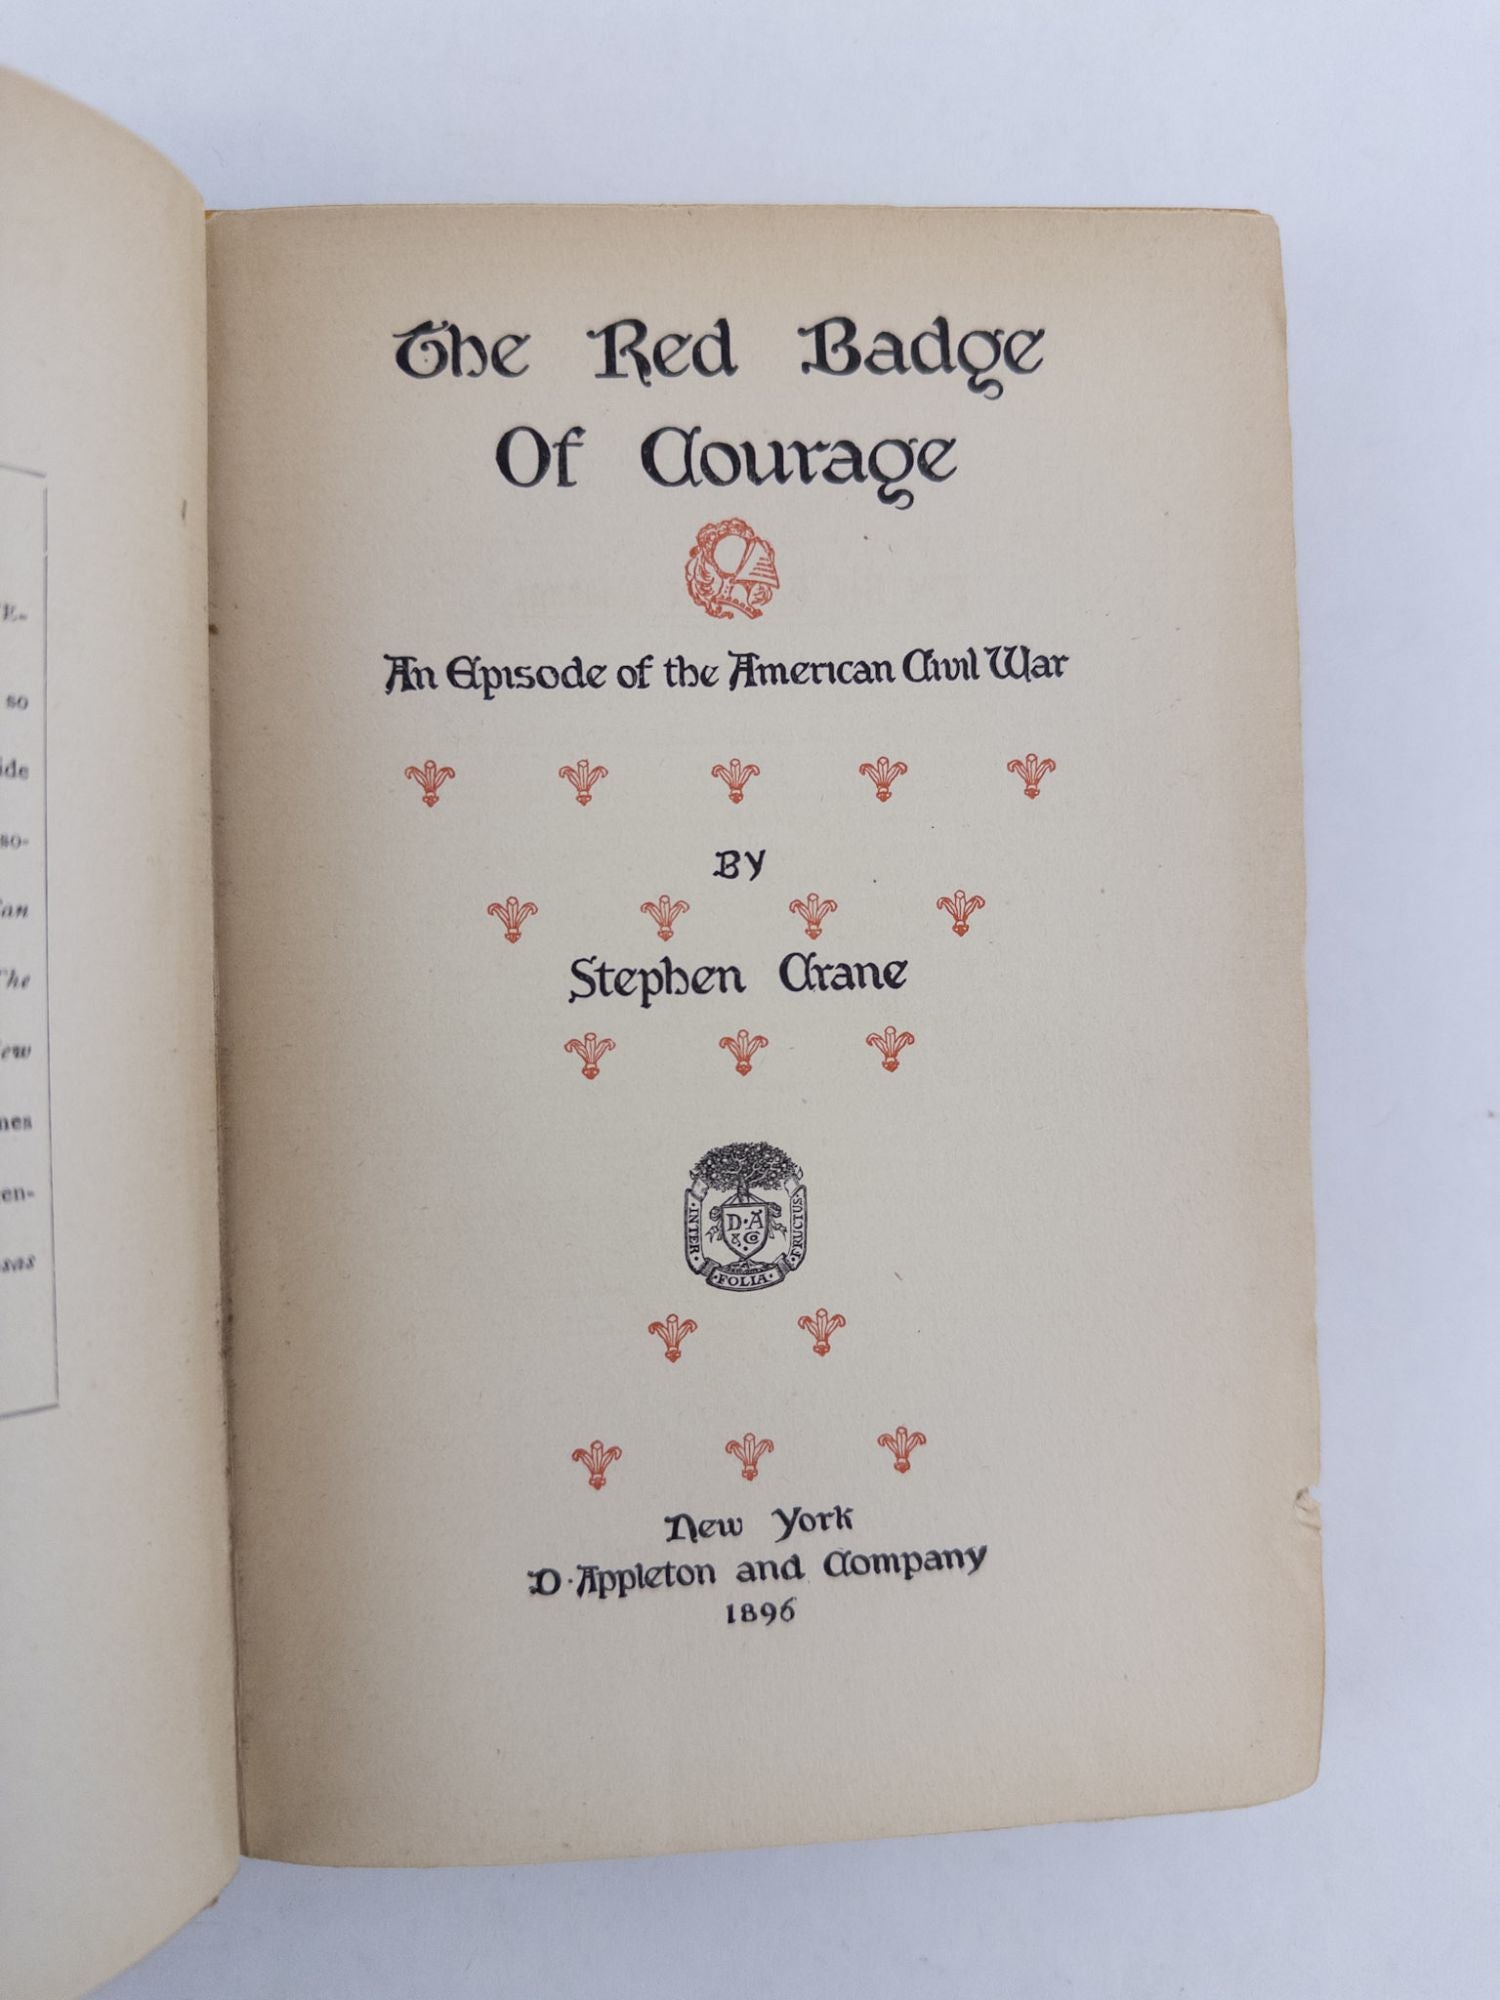 Product Image for THE RED BADGE OF COURAGE